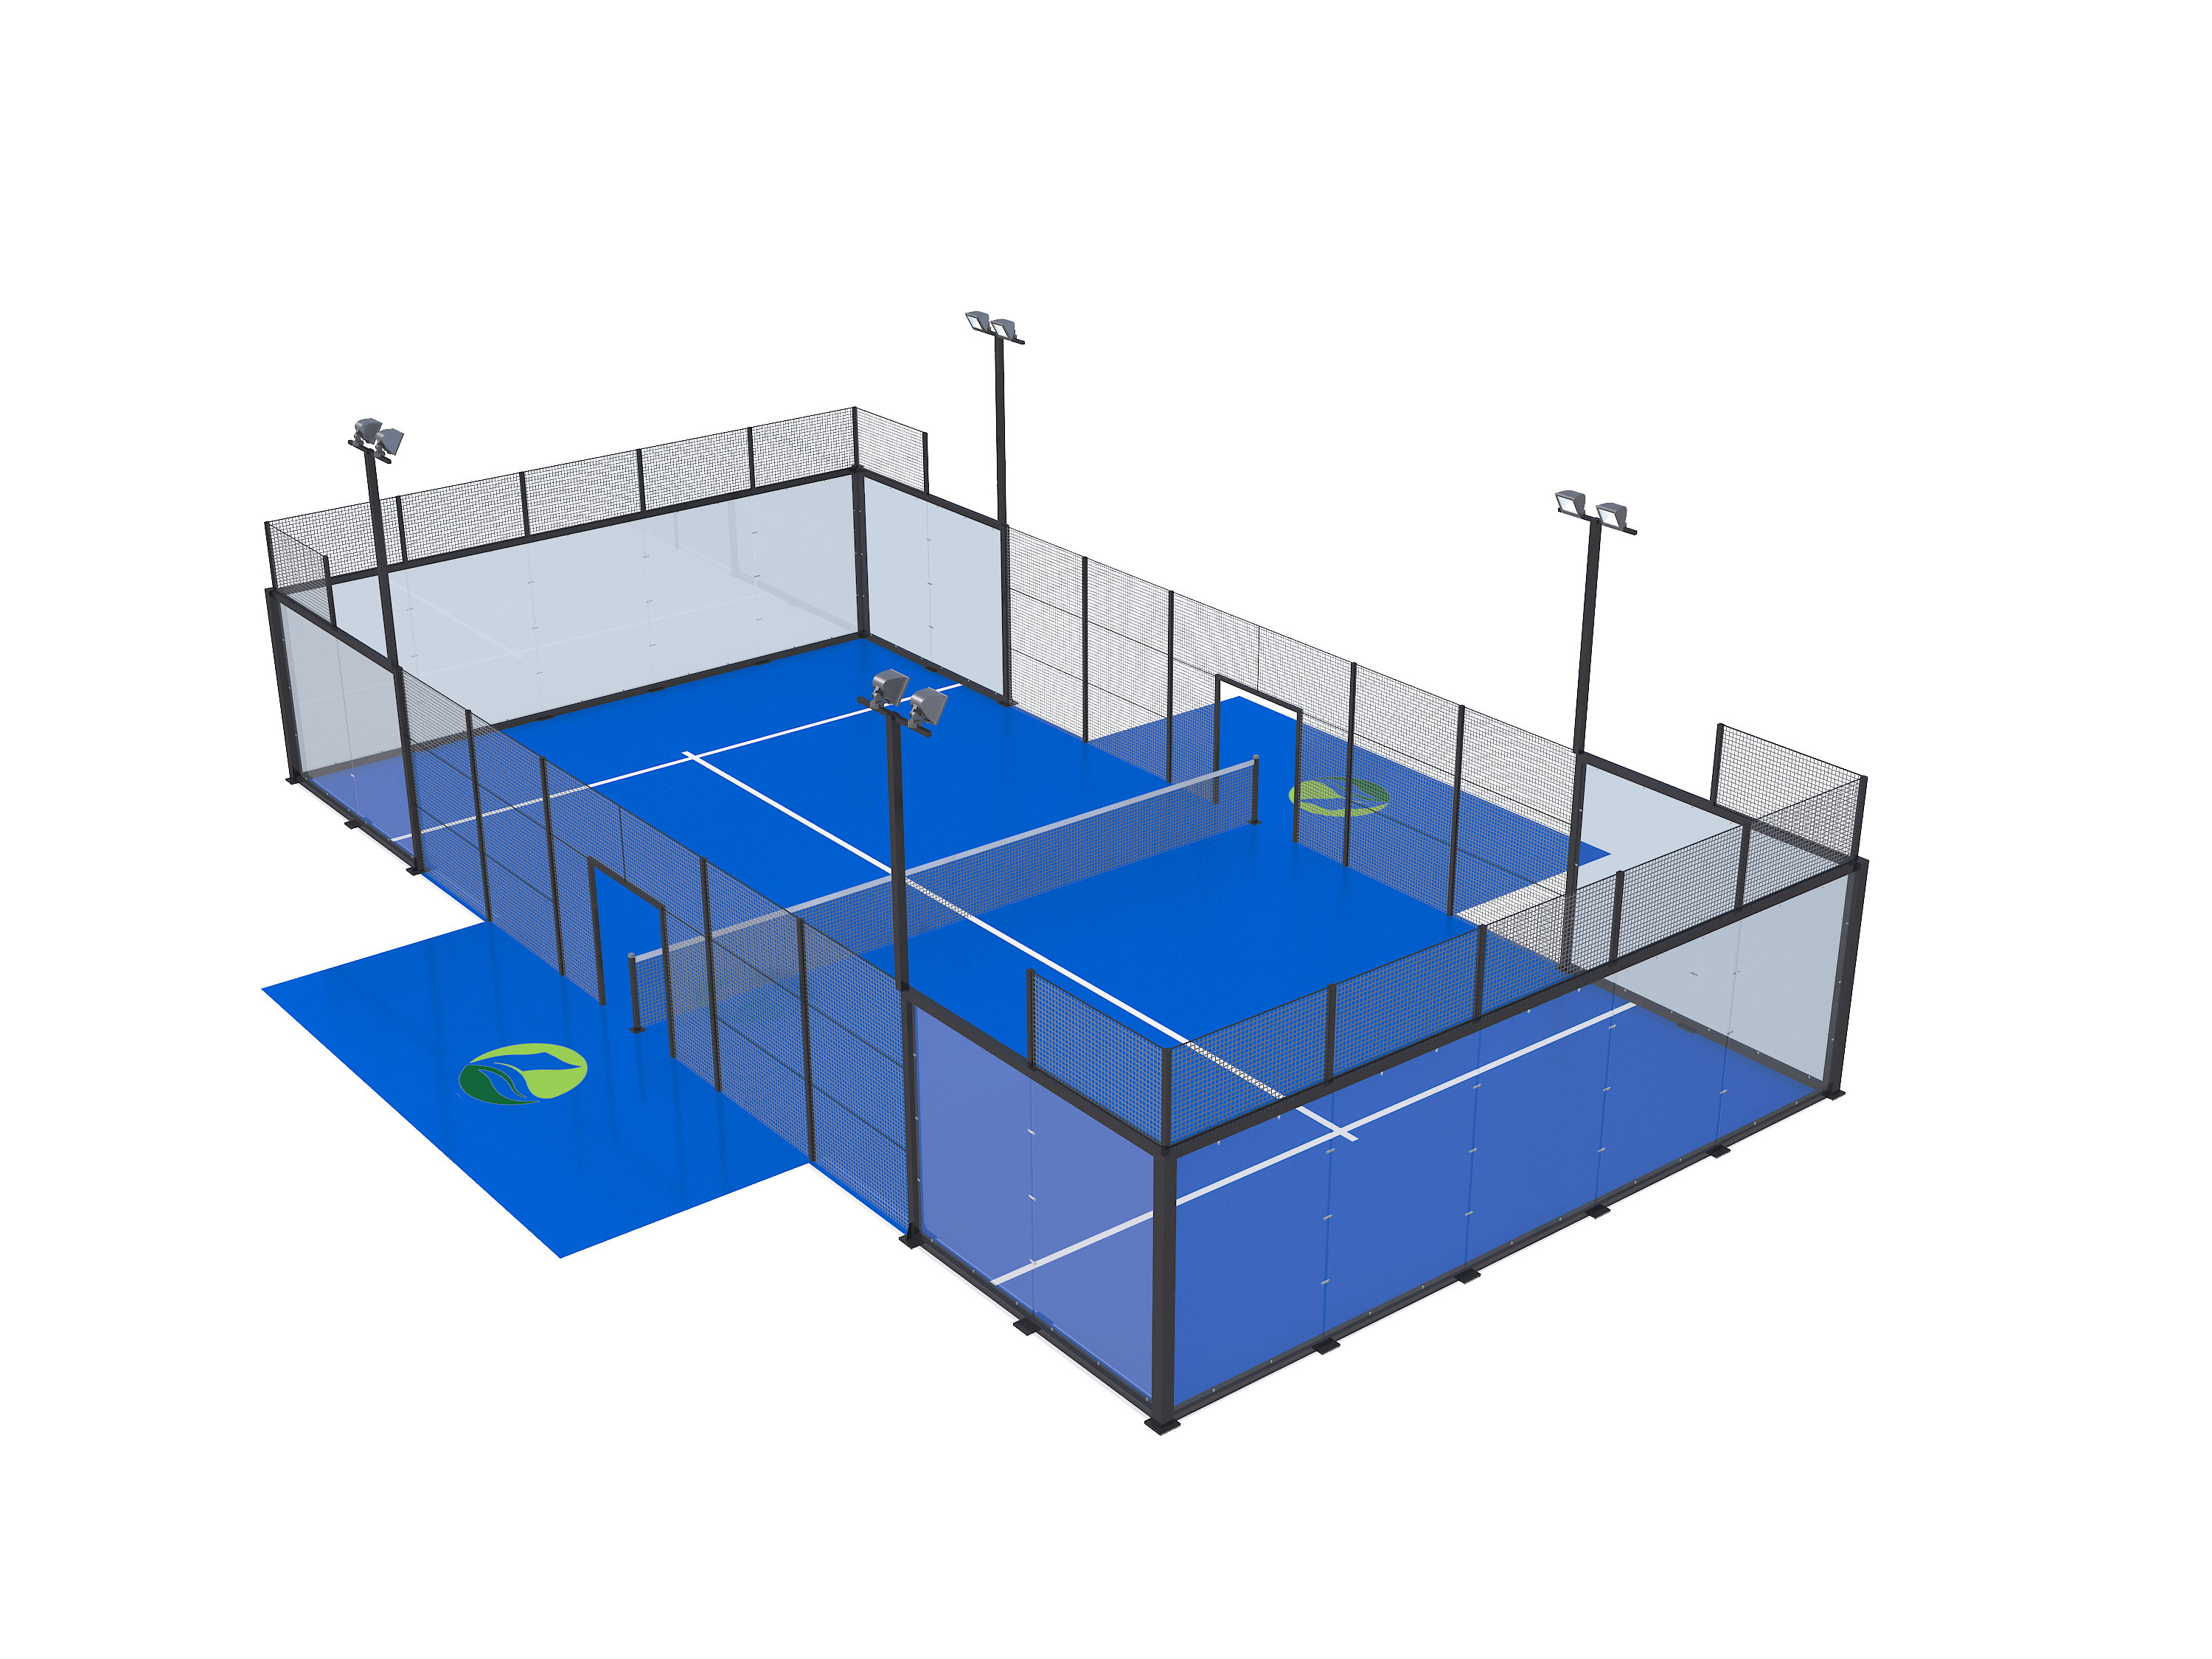 China Manufacturer for Artificial Lawn Supplier - Complete set of Padel Tennis Court Paddle Tennis with Steel Structure, Glass, Artificial Grass & LED light –  LVYIN